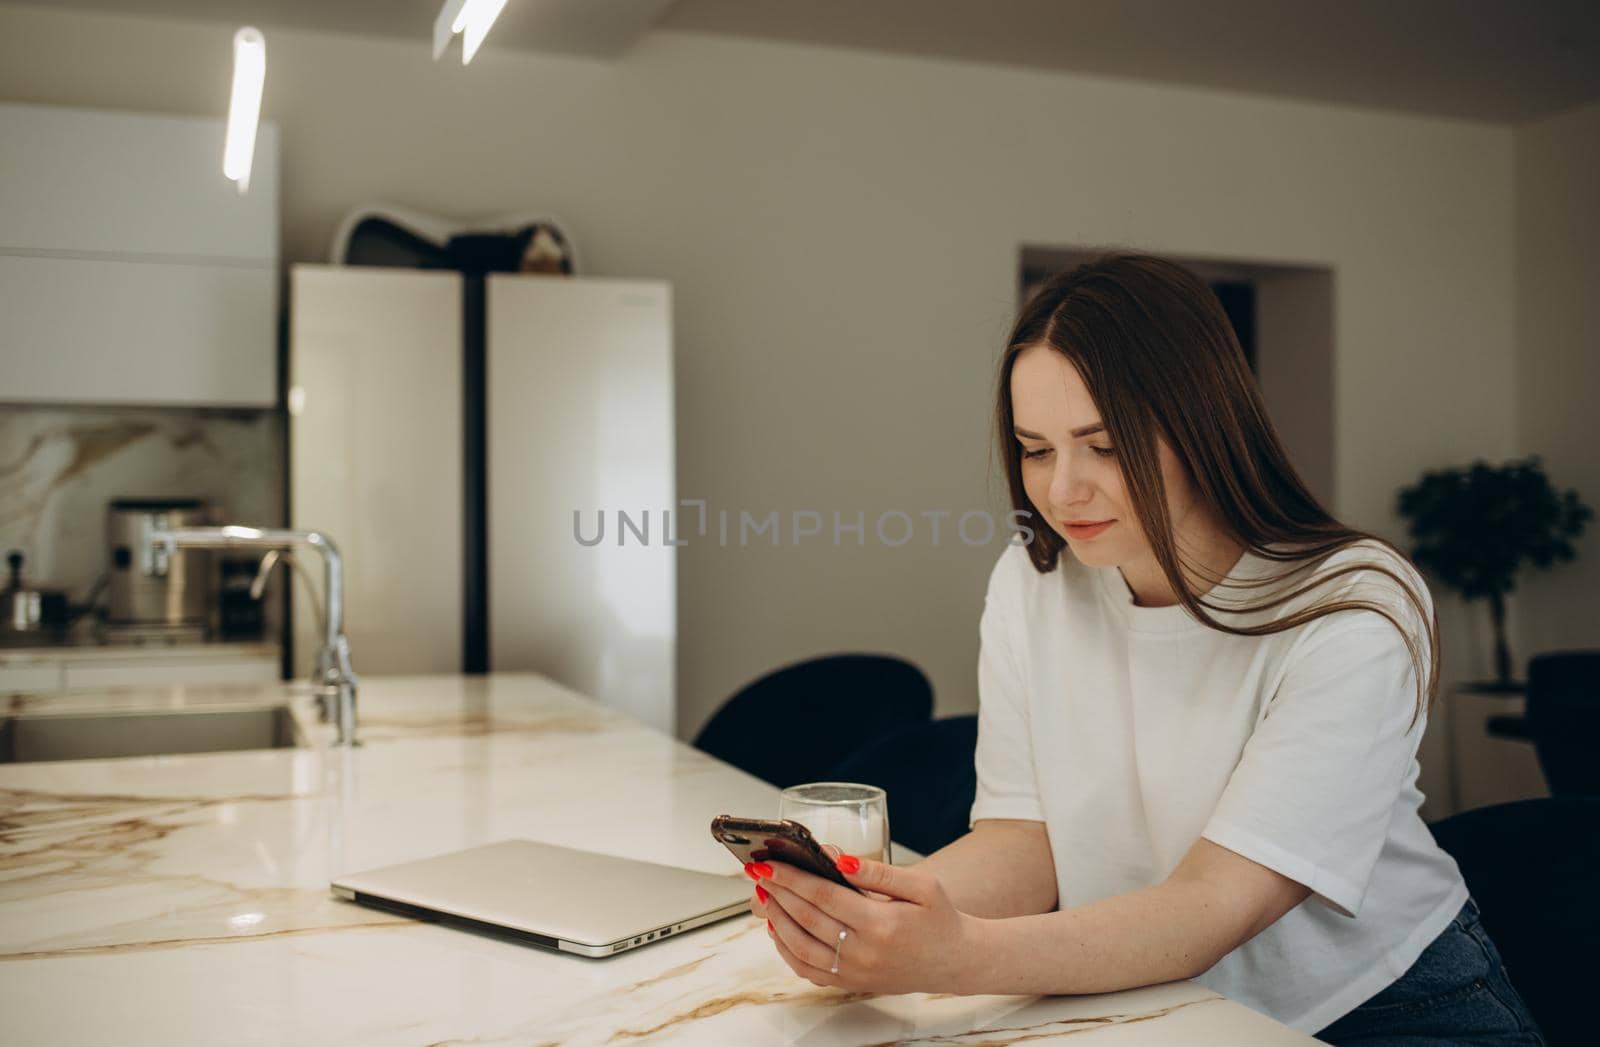 Cute smiling woman reading or searching recipe. Student girl using smartphone at home. Connection, communication, online shopping, distance learning, studying, lockdown concept.